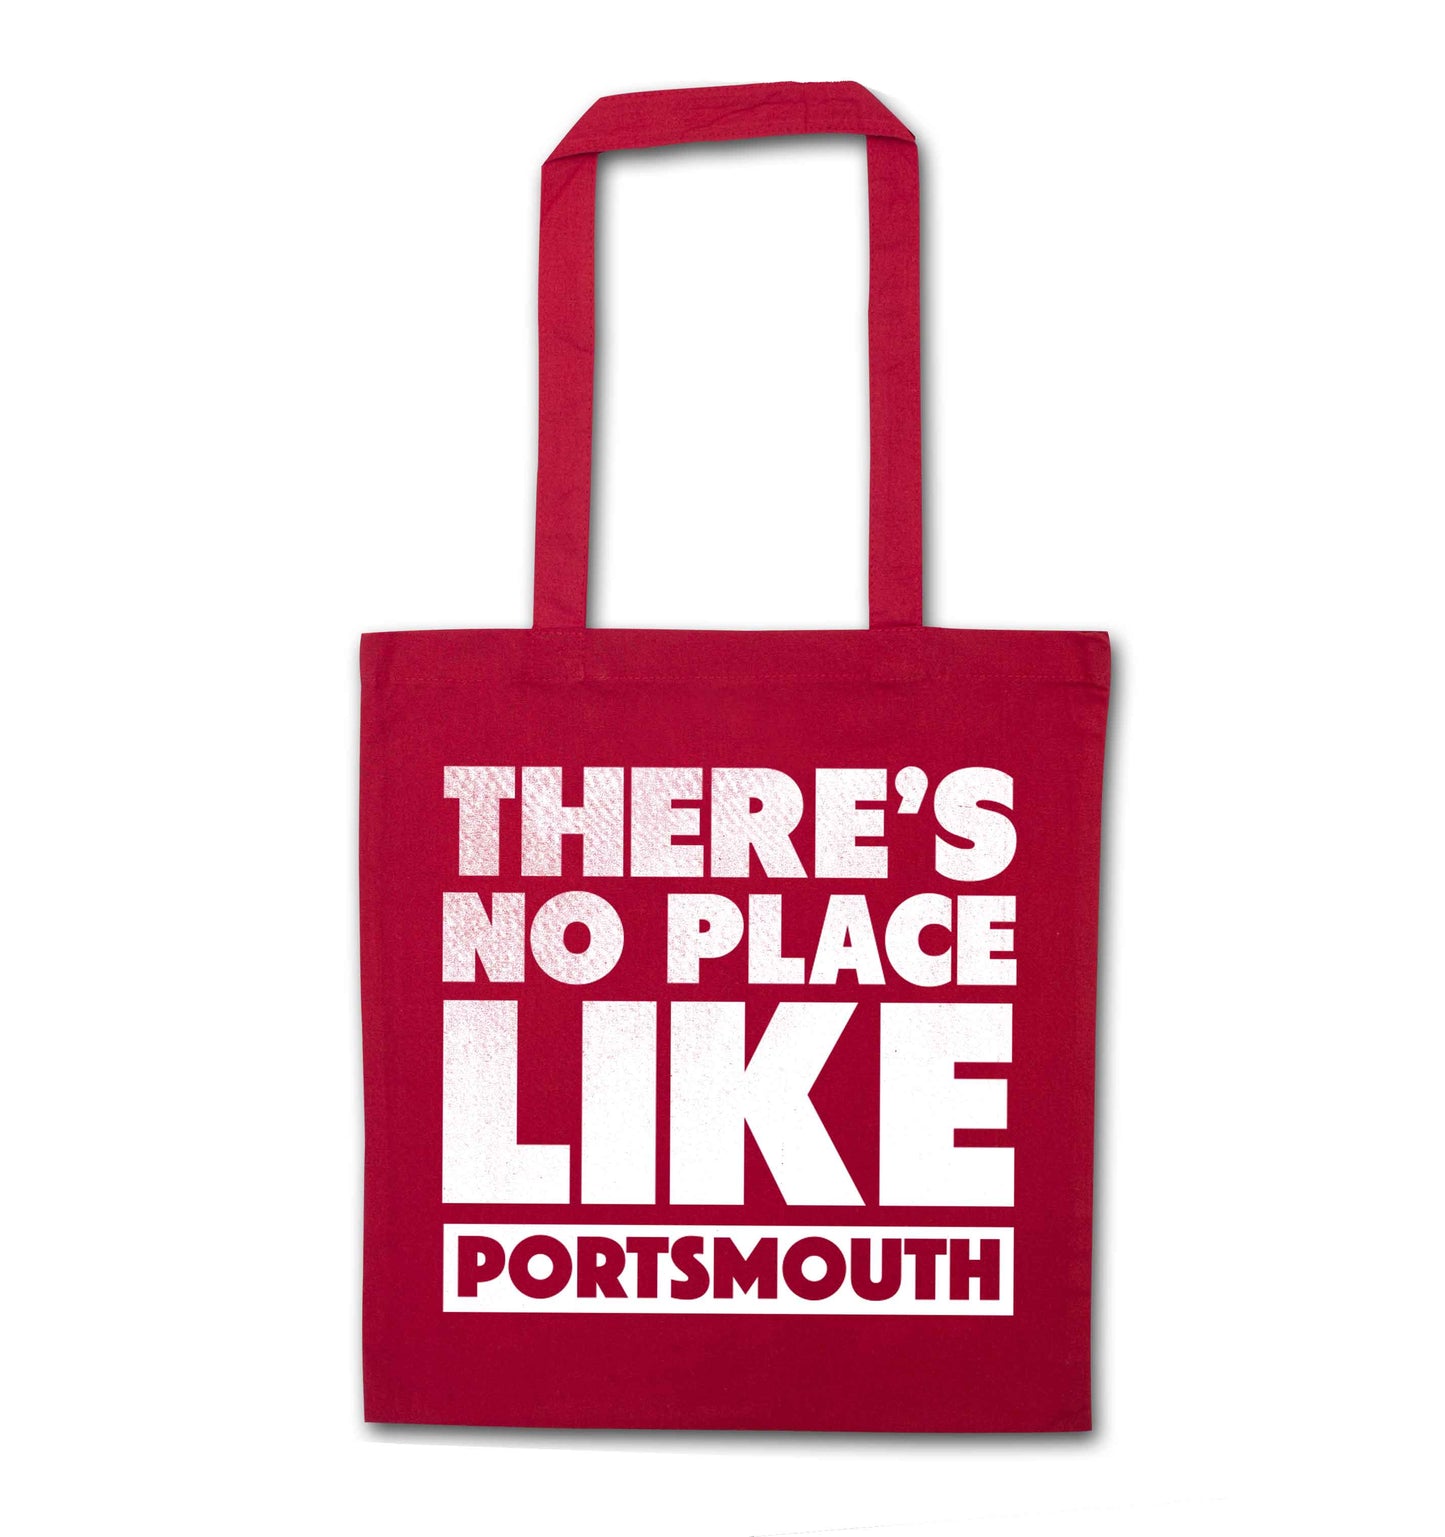 There's no place like Porstmouth red tote bag